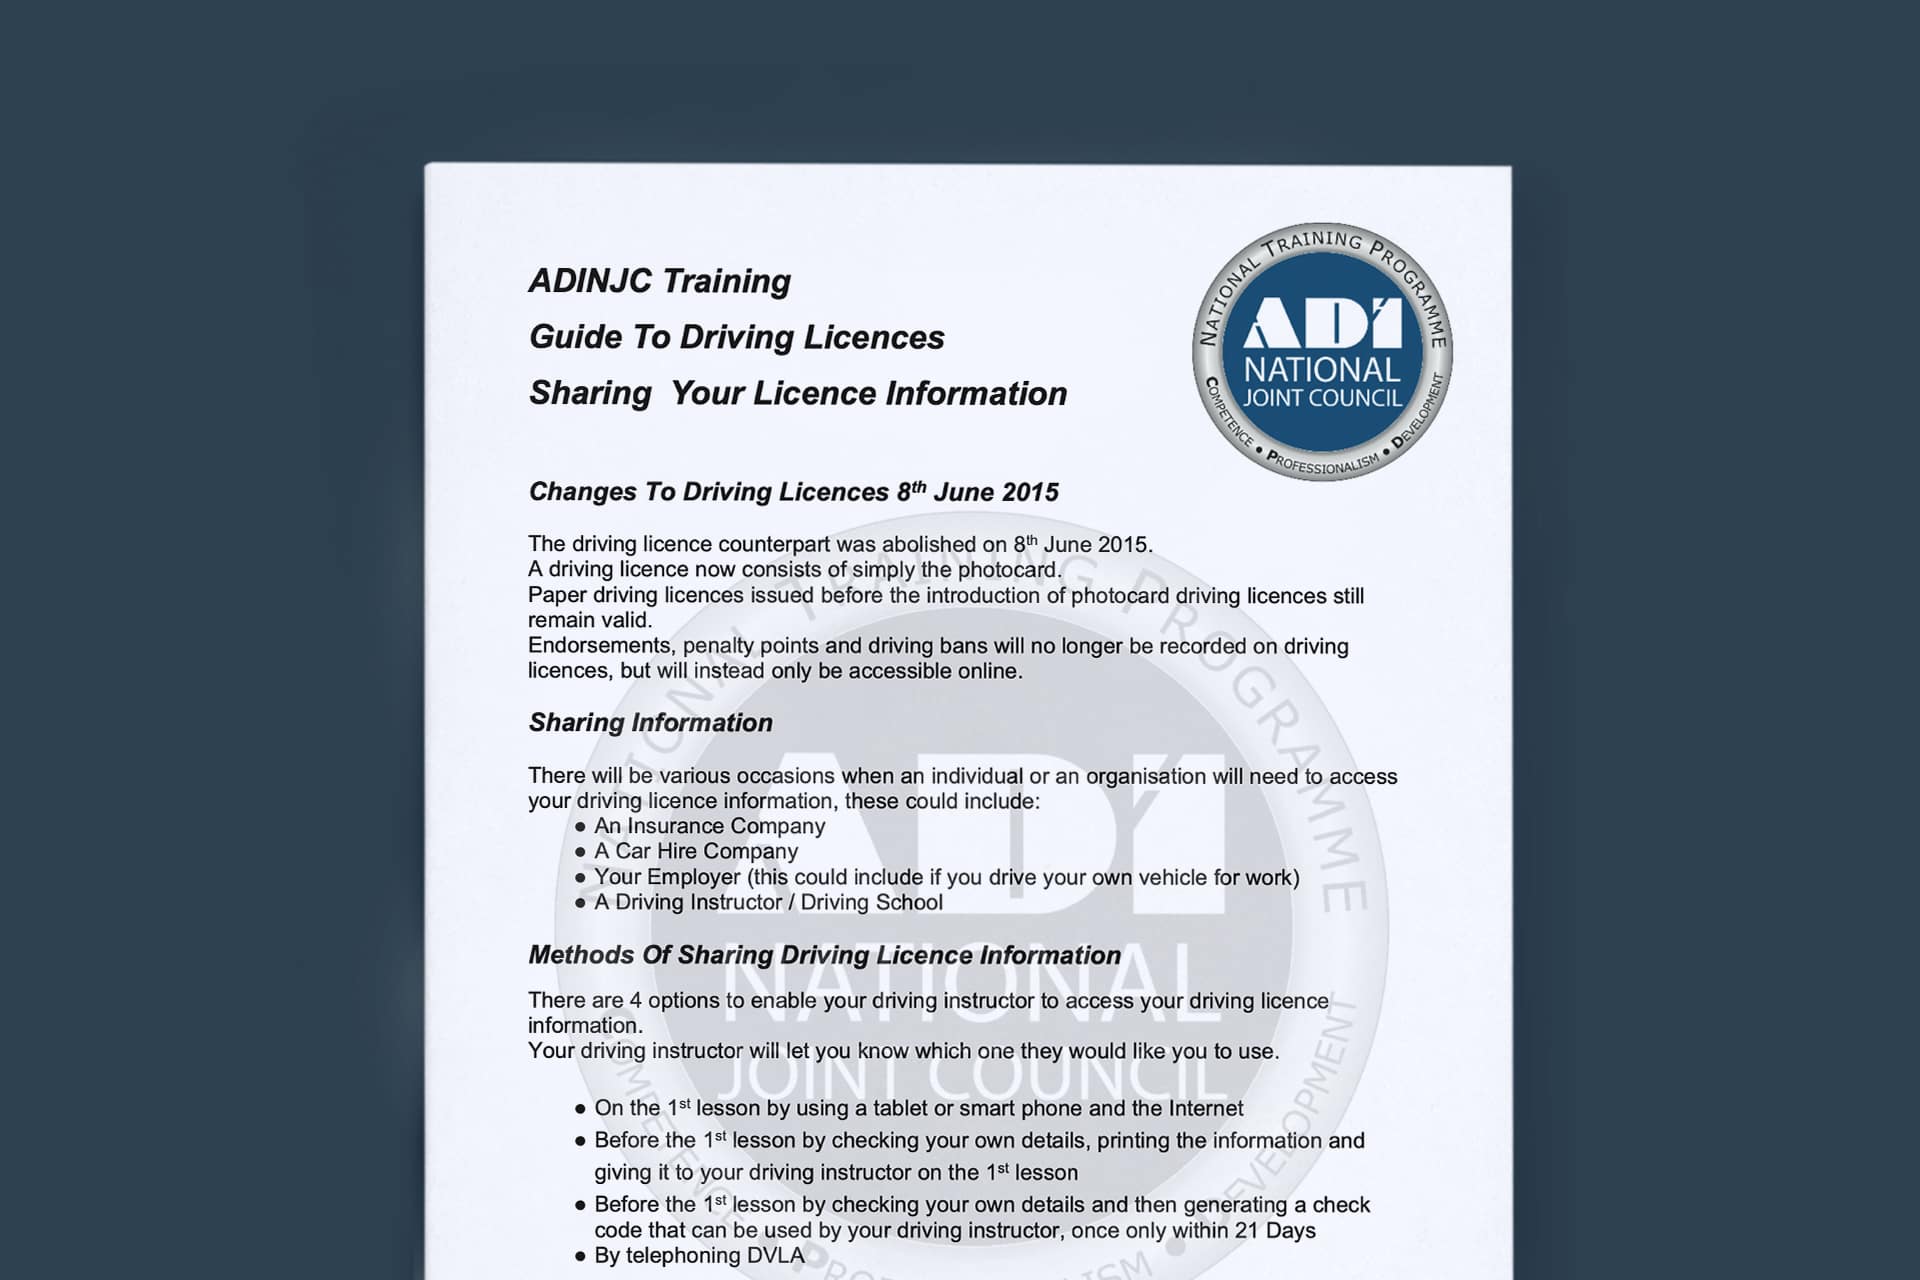 ADINJC Sharing Your Driving Licence Information